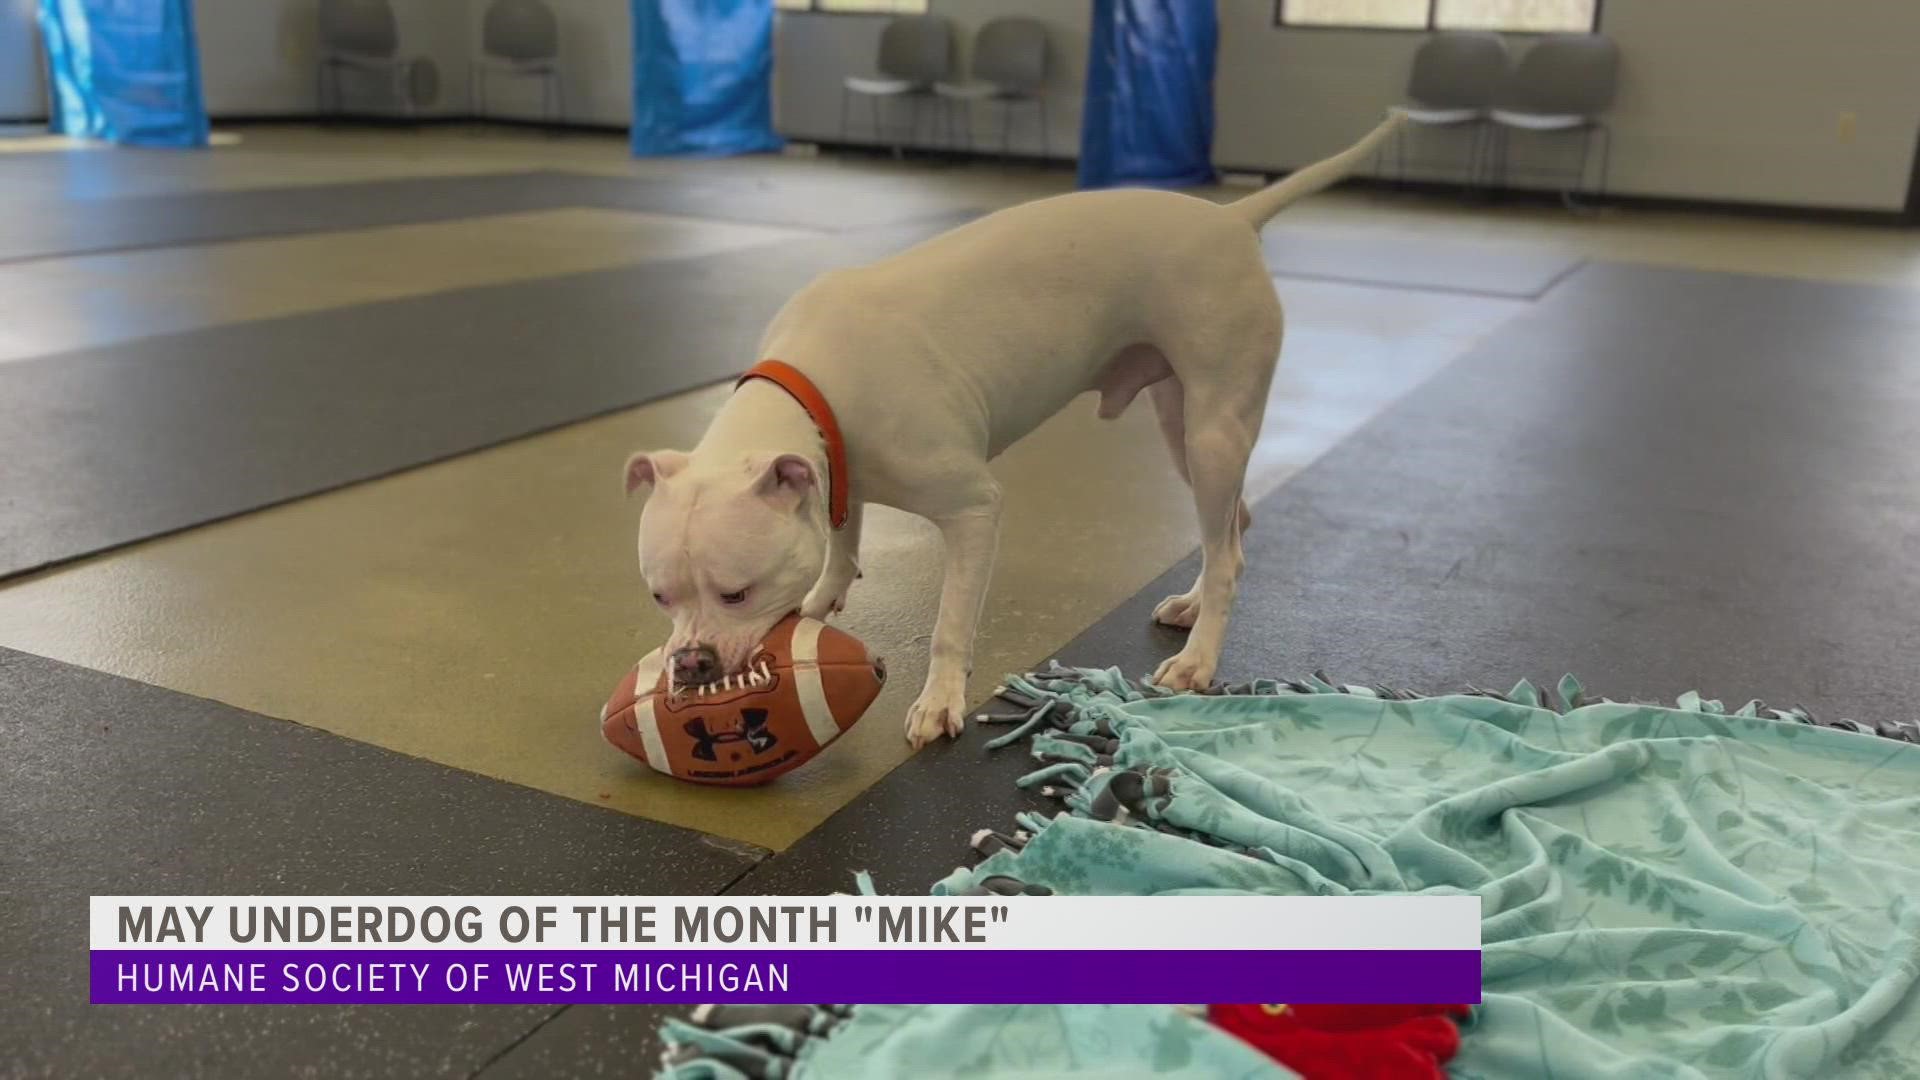 Mike's current home is the Humane Society of West Michigan, but he's looking for his forever home with you!